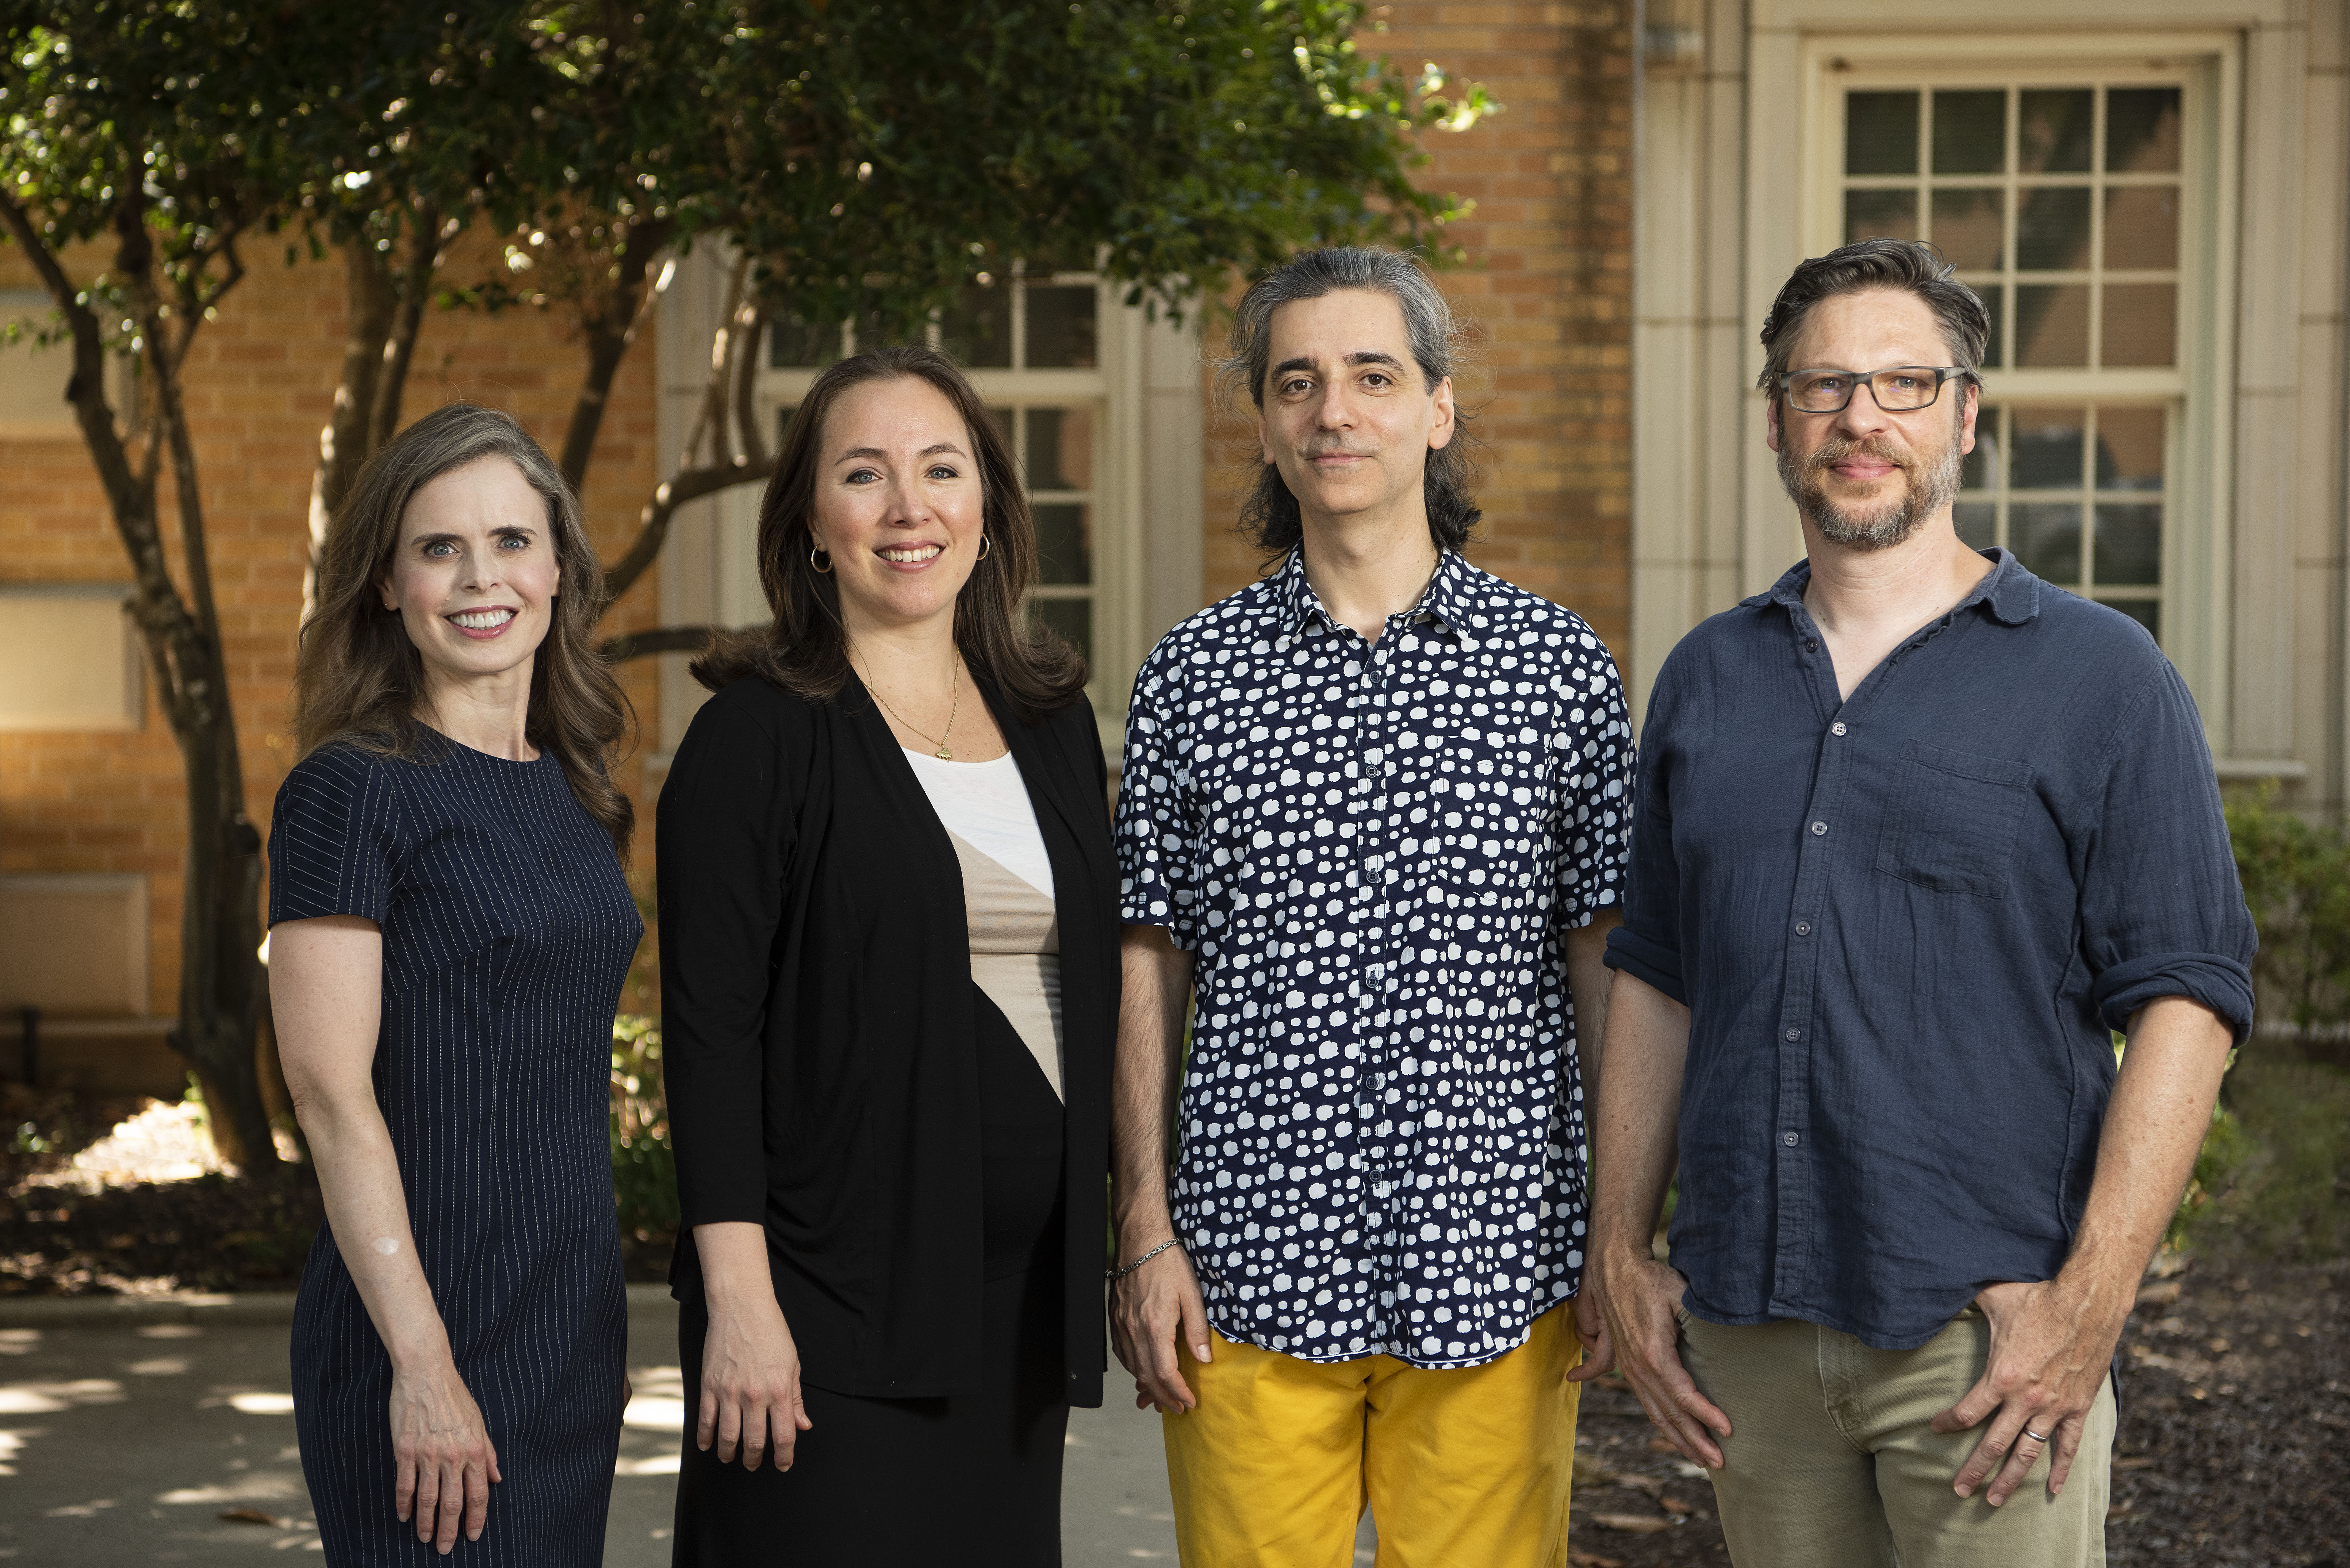 From left, Lari Gibbons, Fabiana Claure, Panayiotis Kokoras, and Corey Marks, were named as 2019 IAA fellows and will research a variety of art-related topics over the next semester.  Photo by Ranjani Groth/UNT